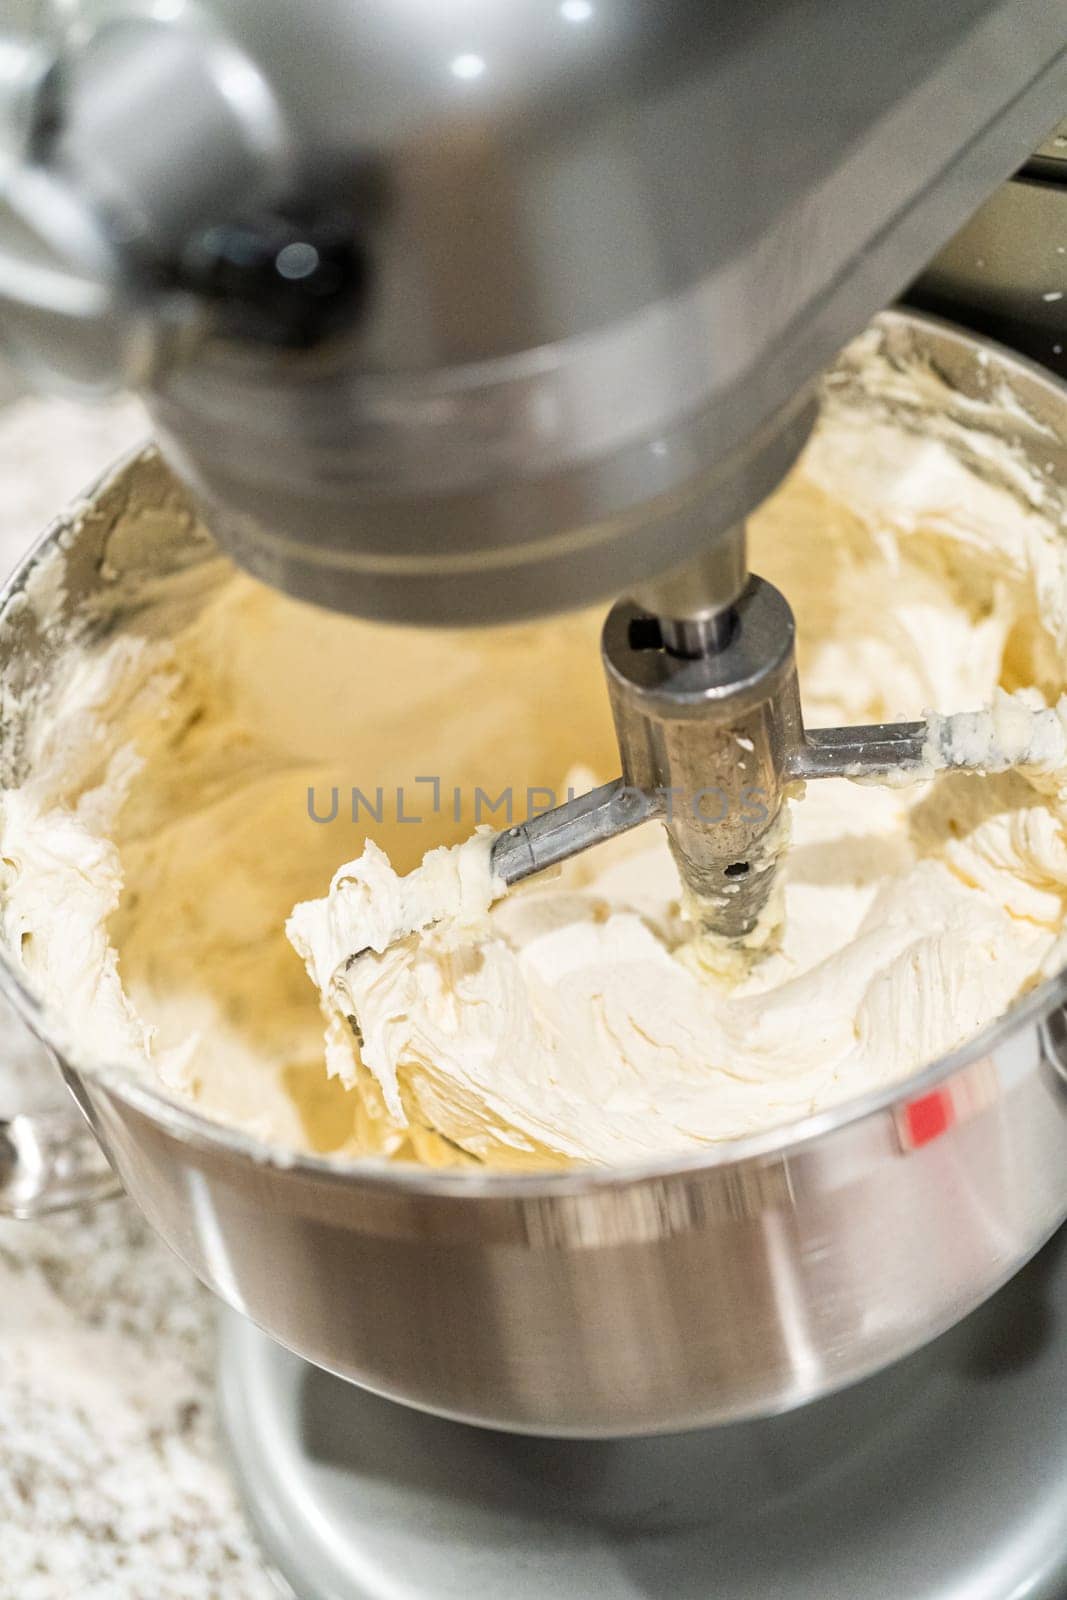 Stand mixer whips up creamy buttercream frosting to perfection, ready for dessert decorating.